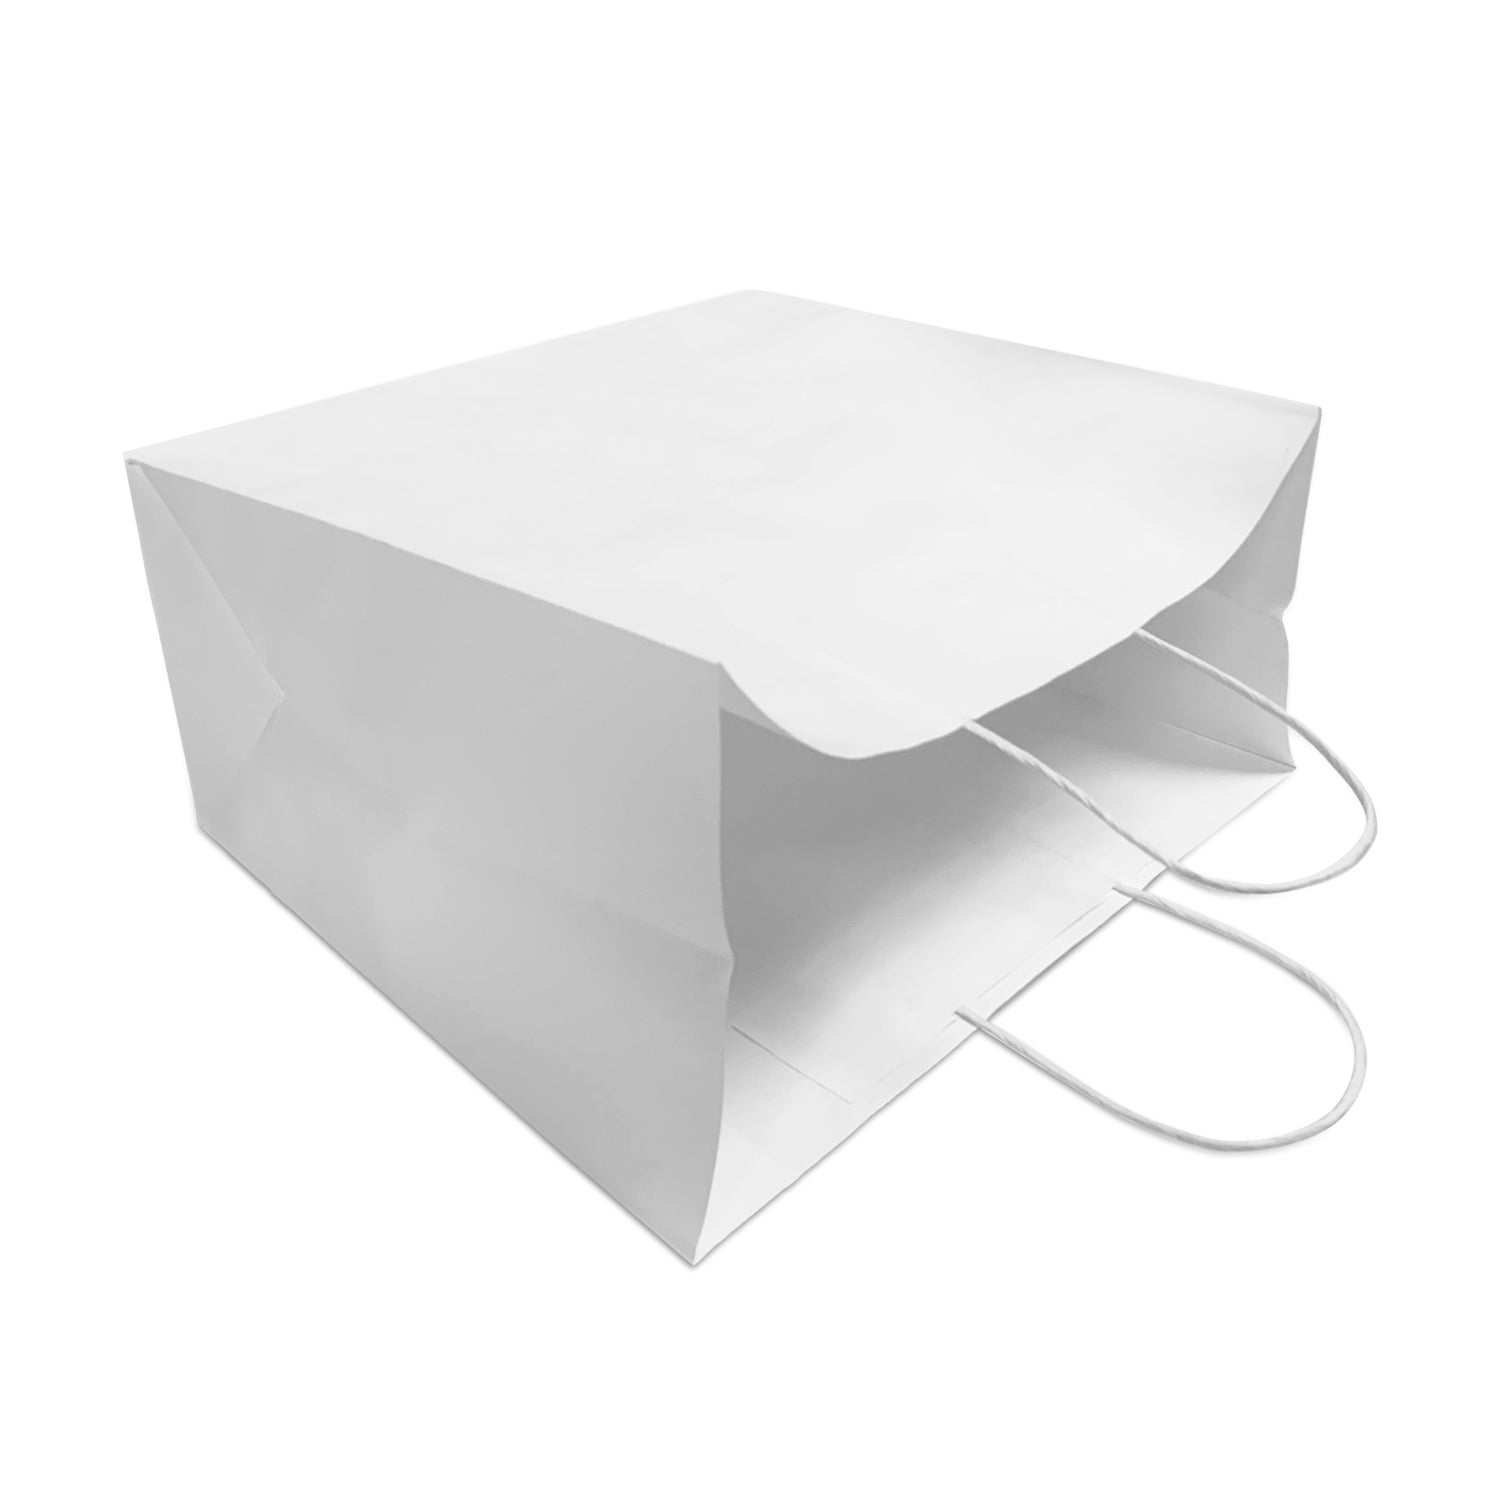 250 Pcs, Star, 13x7x13 inches, White Paper Bags, with Twisted Handle